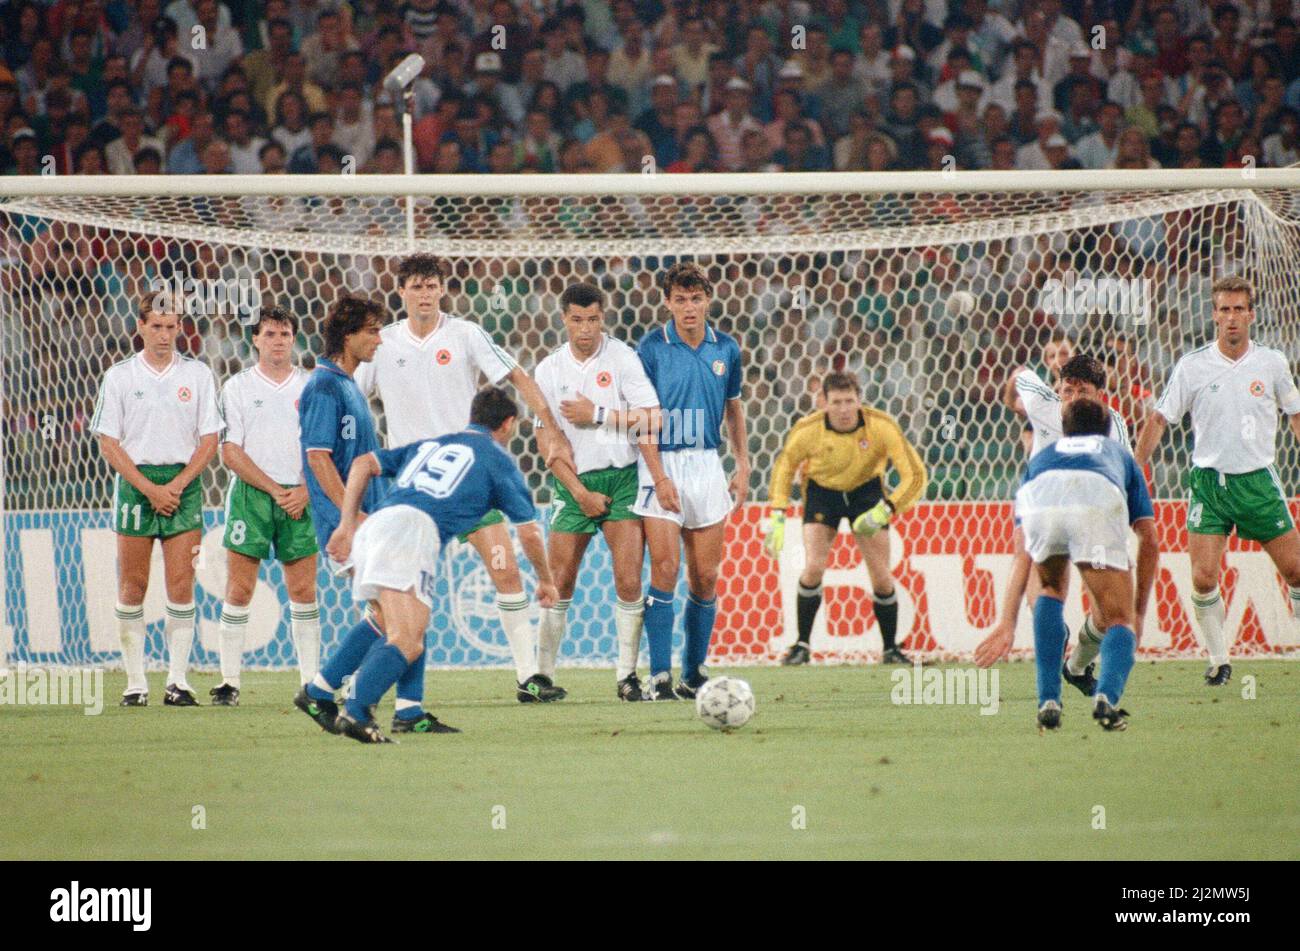 1990 World Cup Quarter Final at the Stadio Olimpico in  Rome, Italy. Republic of Ireland 0 v Italy 1. Free kick for Italy taken by Salvatore Schillaci as Irish defenders form a wall watched by goalkeeper Pat Bonner. 30th June 1990. Stock Photo